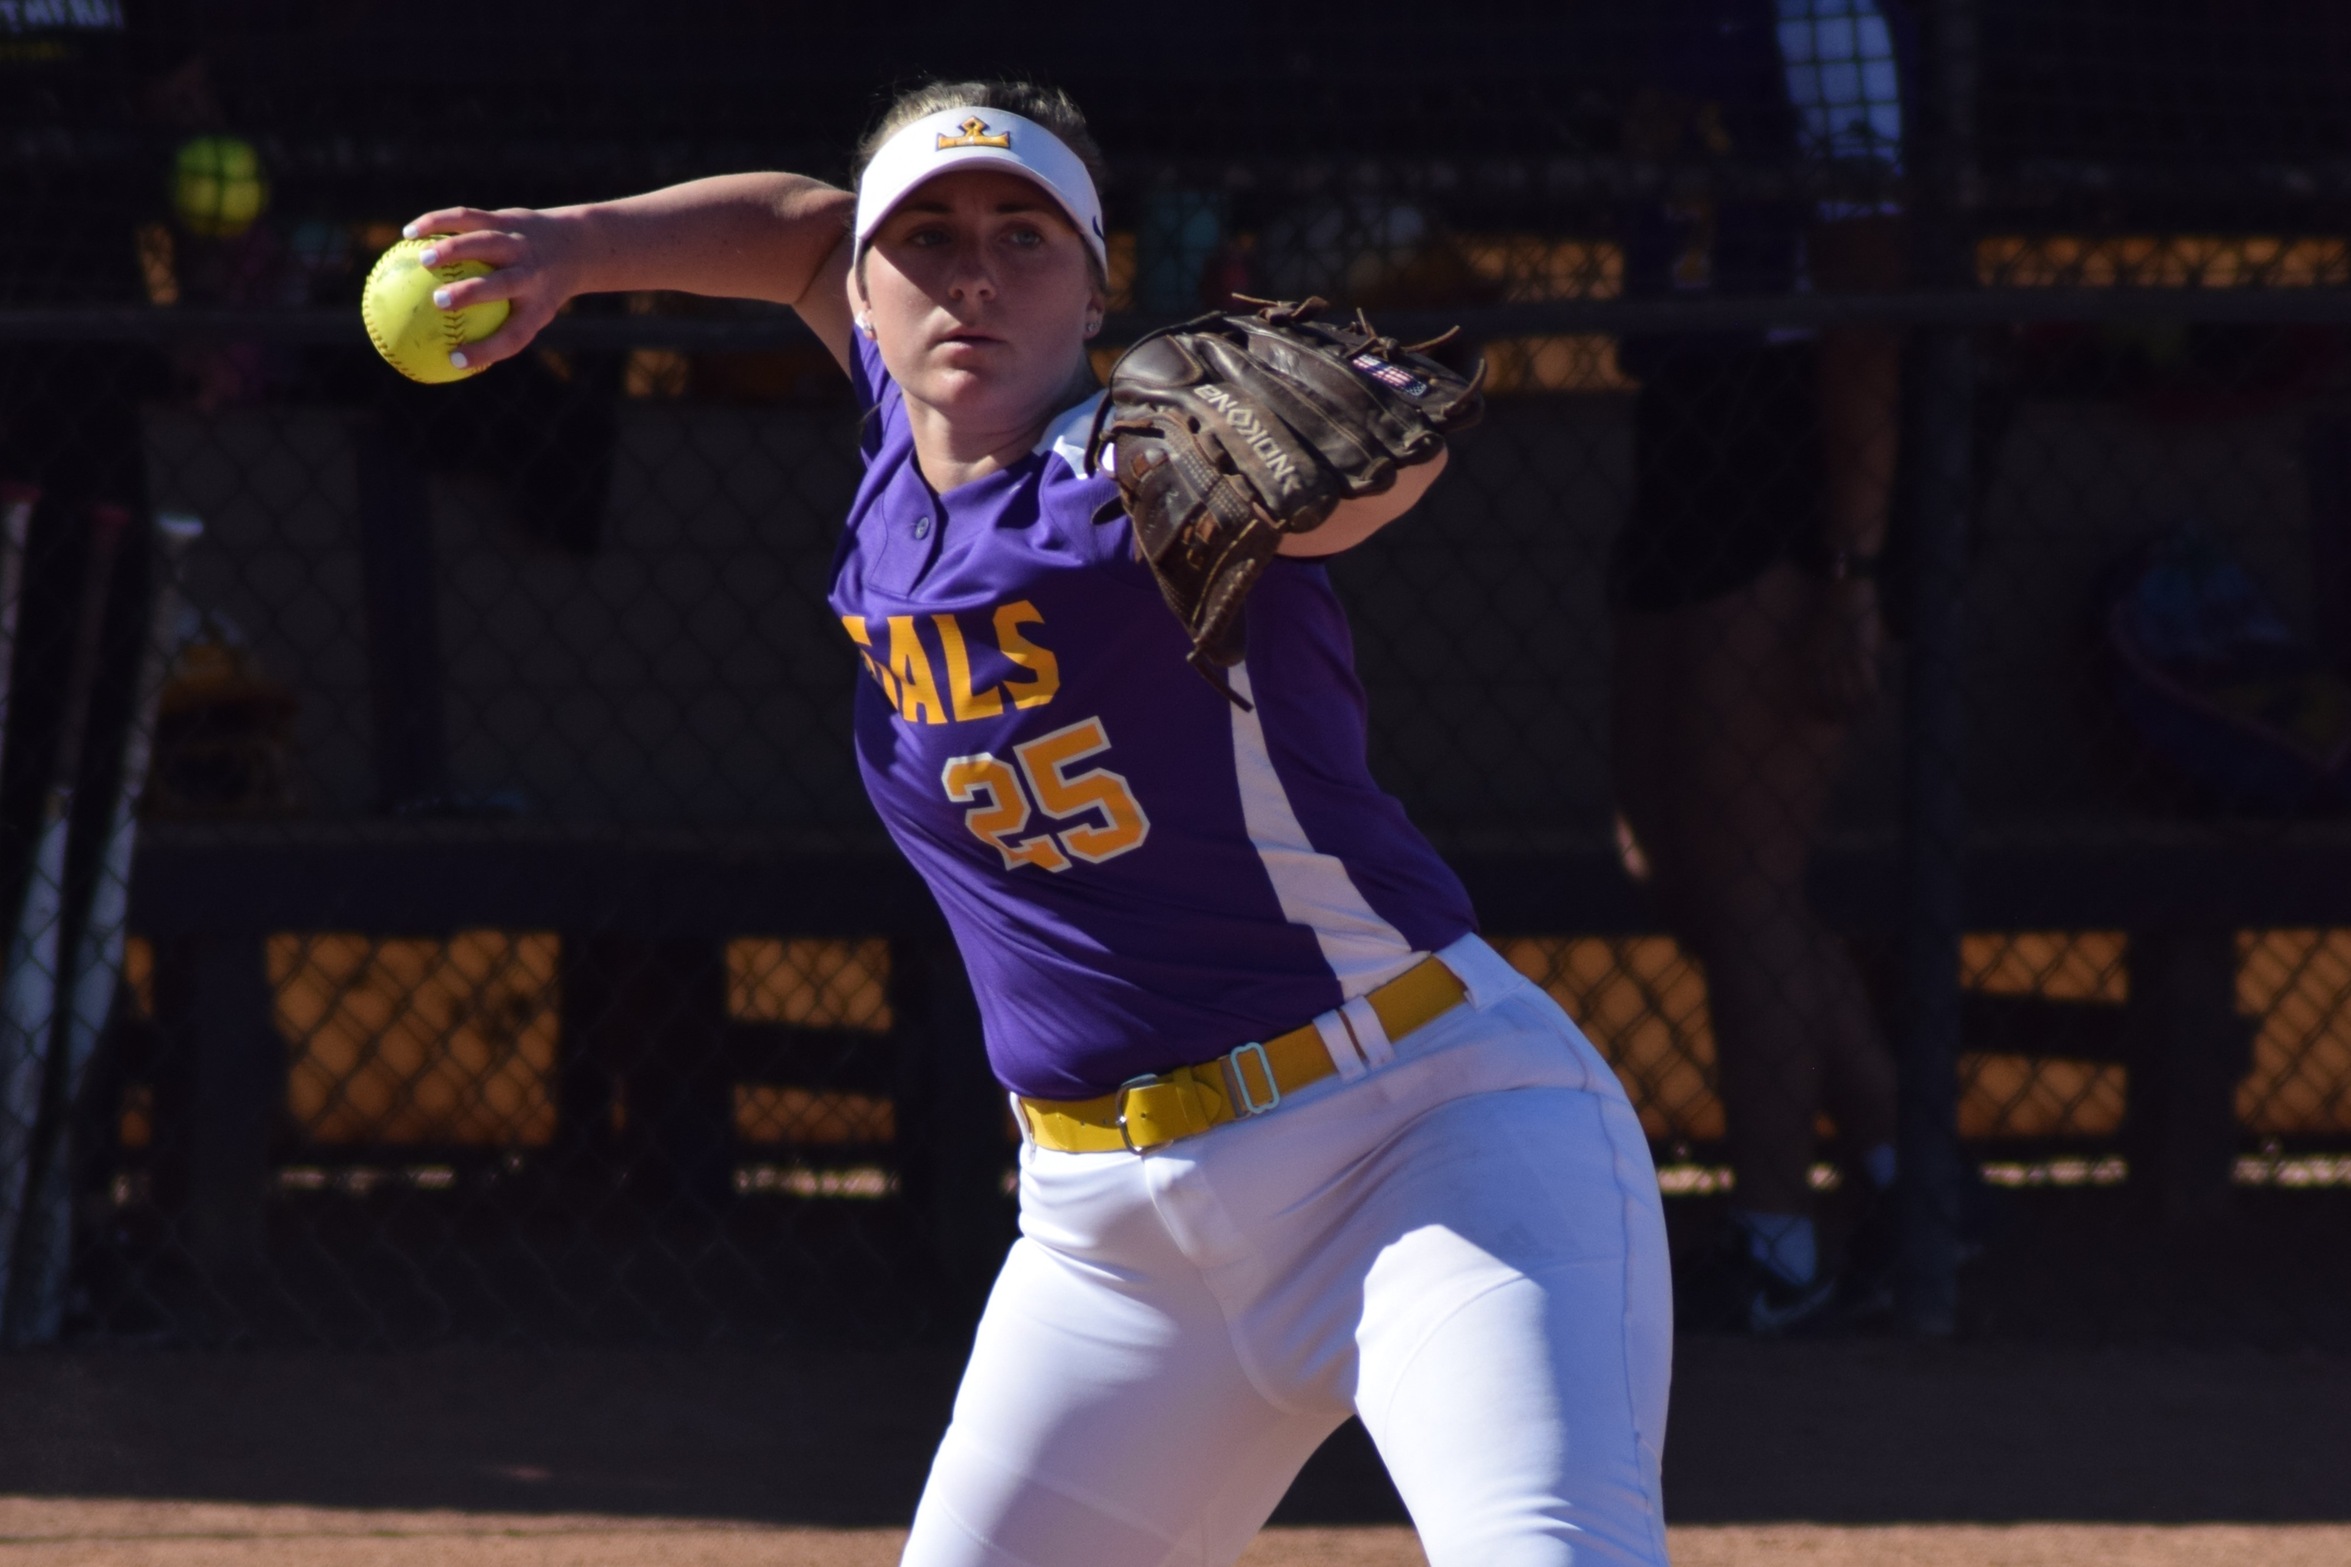 Regals Drop Double Header to Conference Leading Chapman